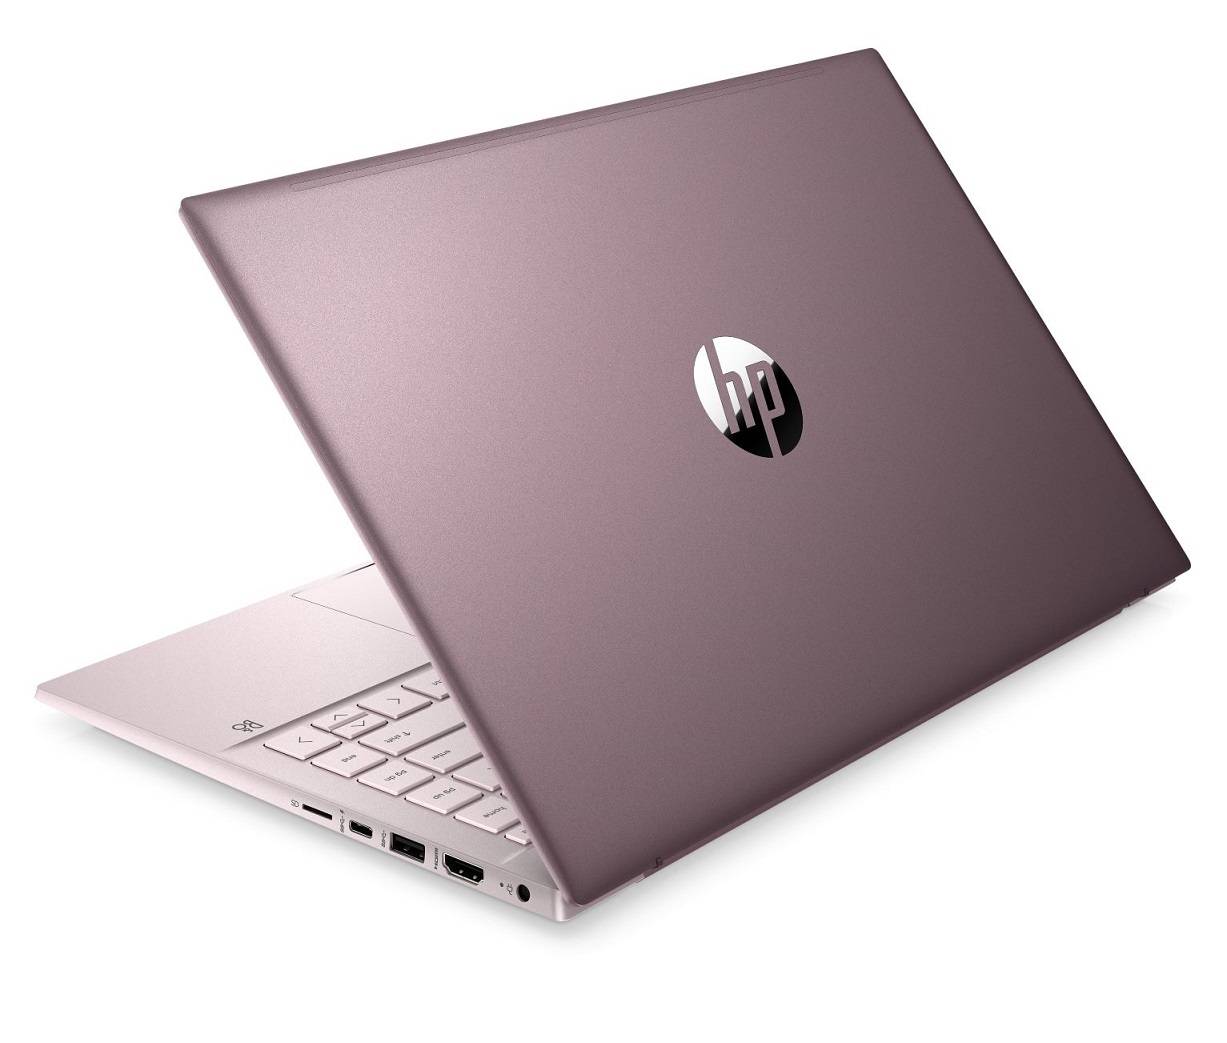 HP introduces first consumer PCs made with ocean-bound plastics.